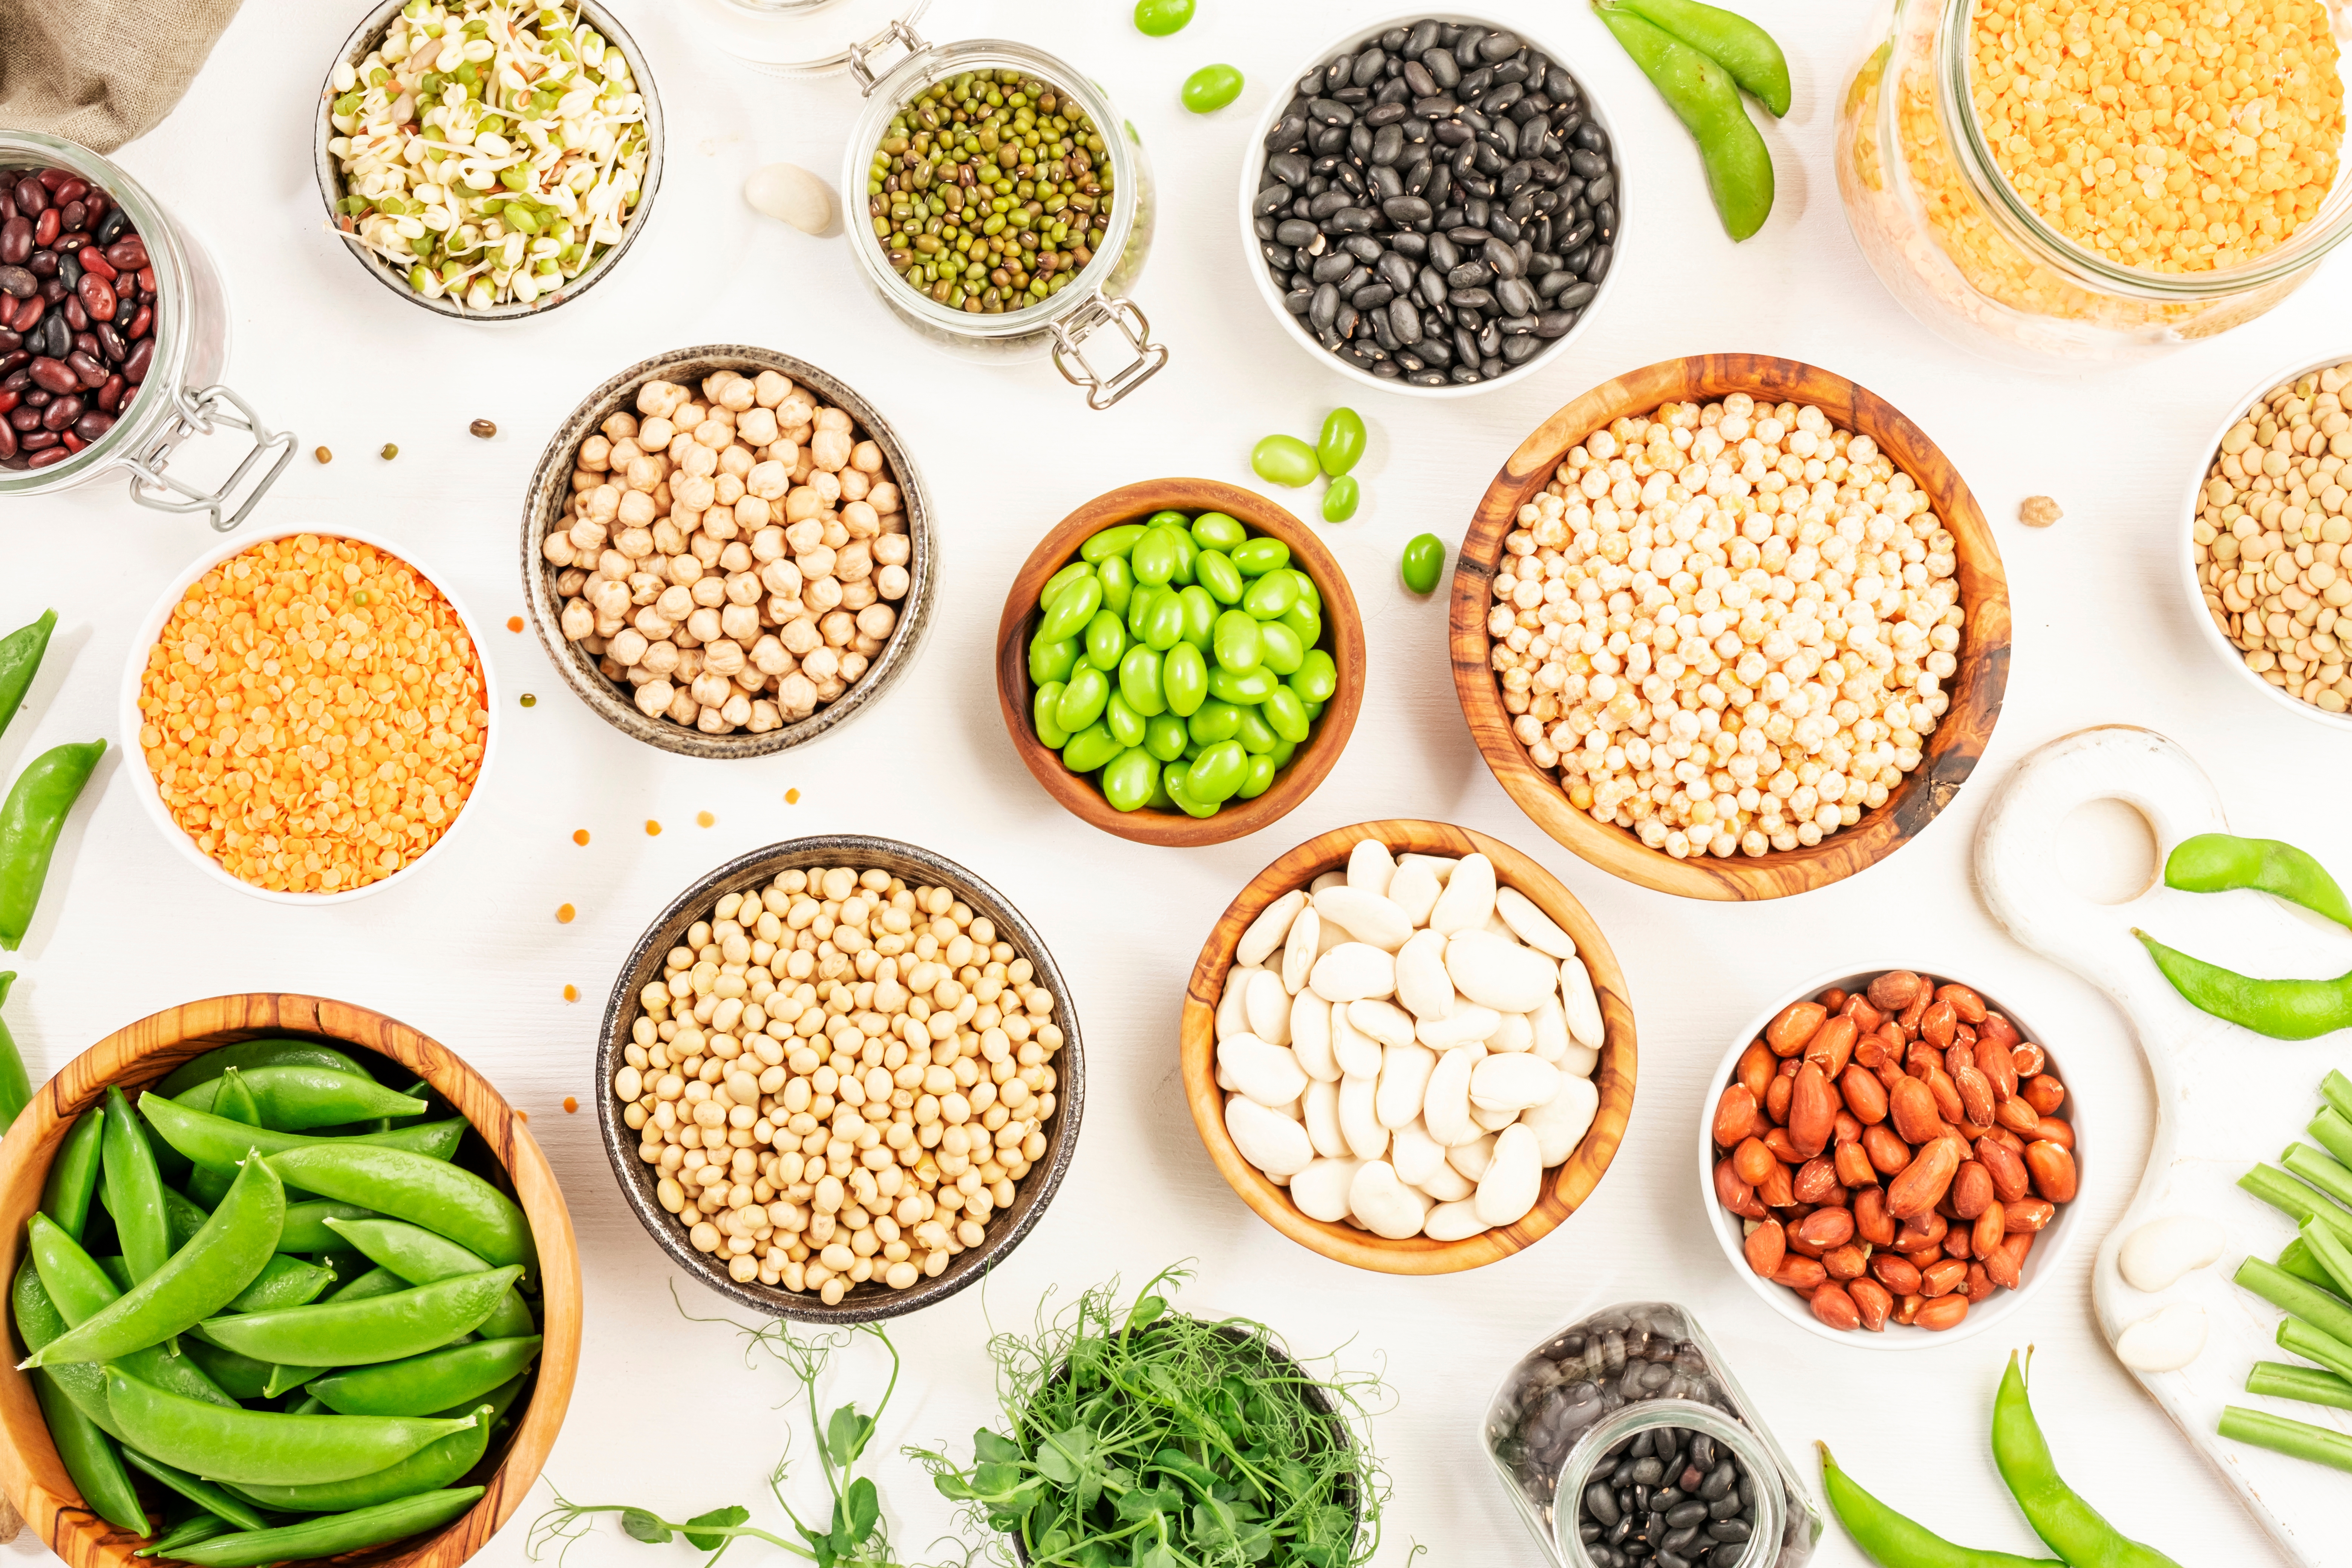 Plant proteins